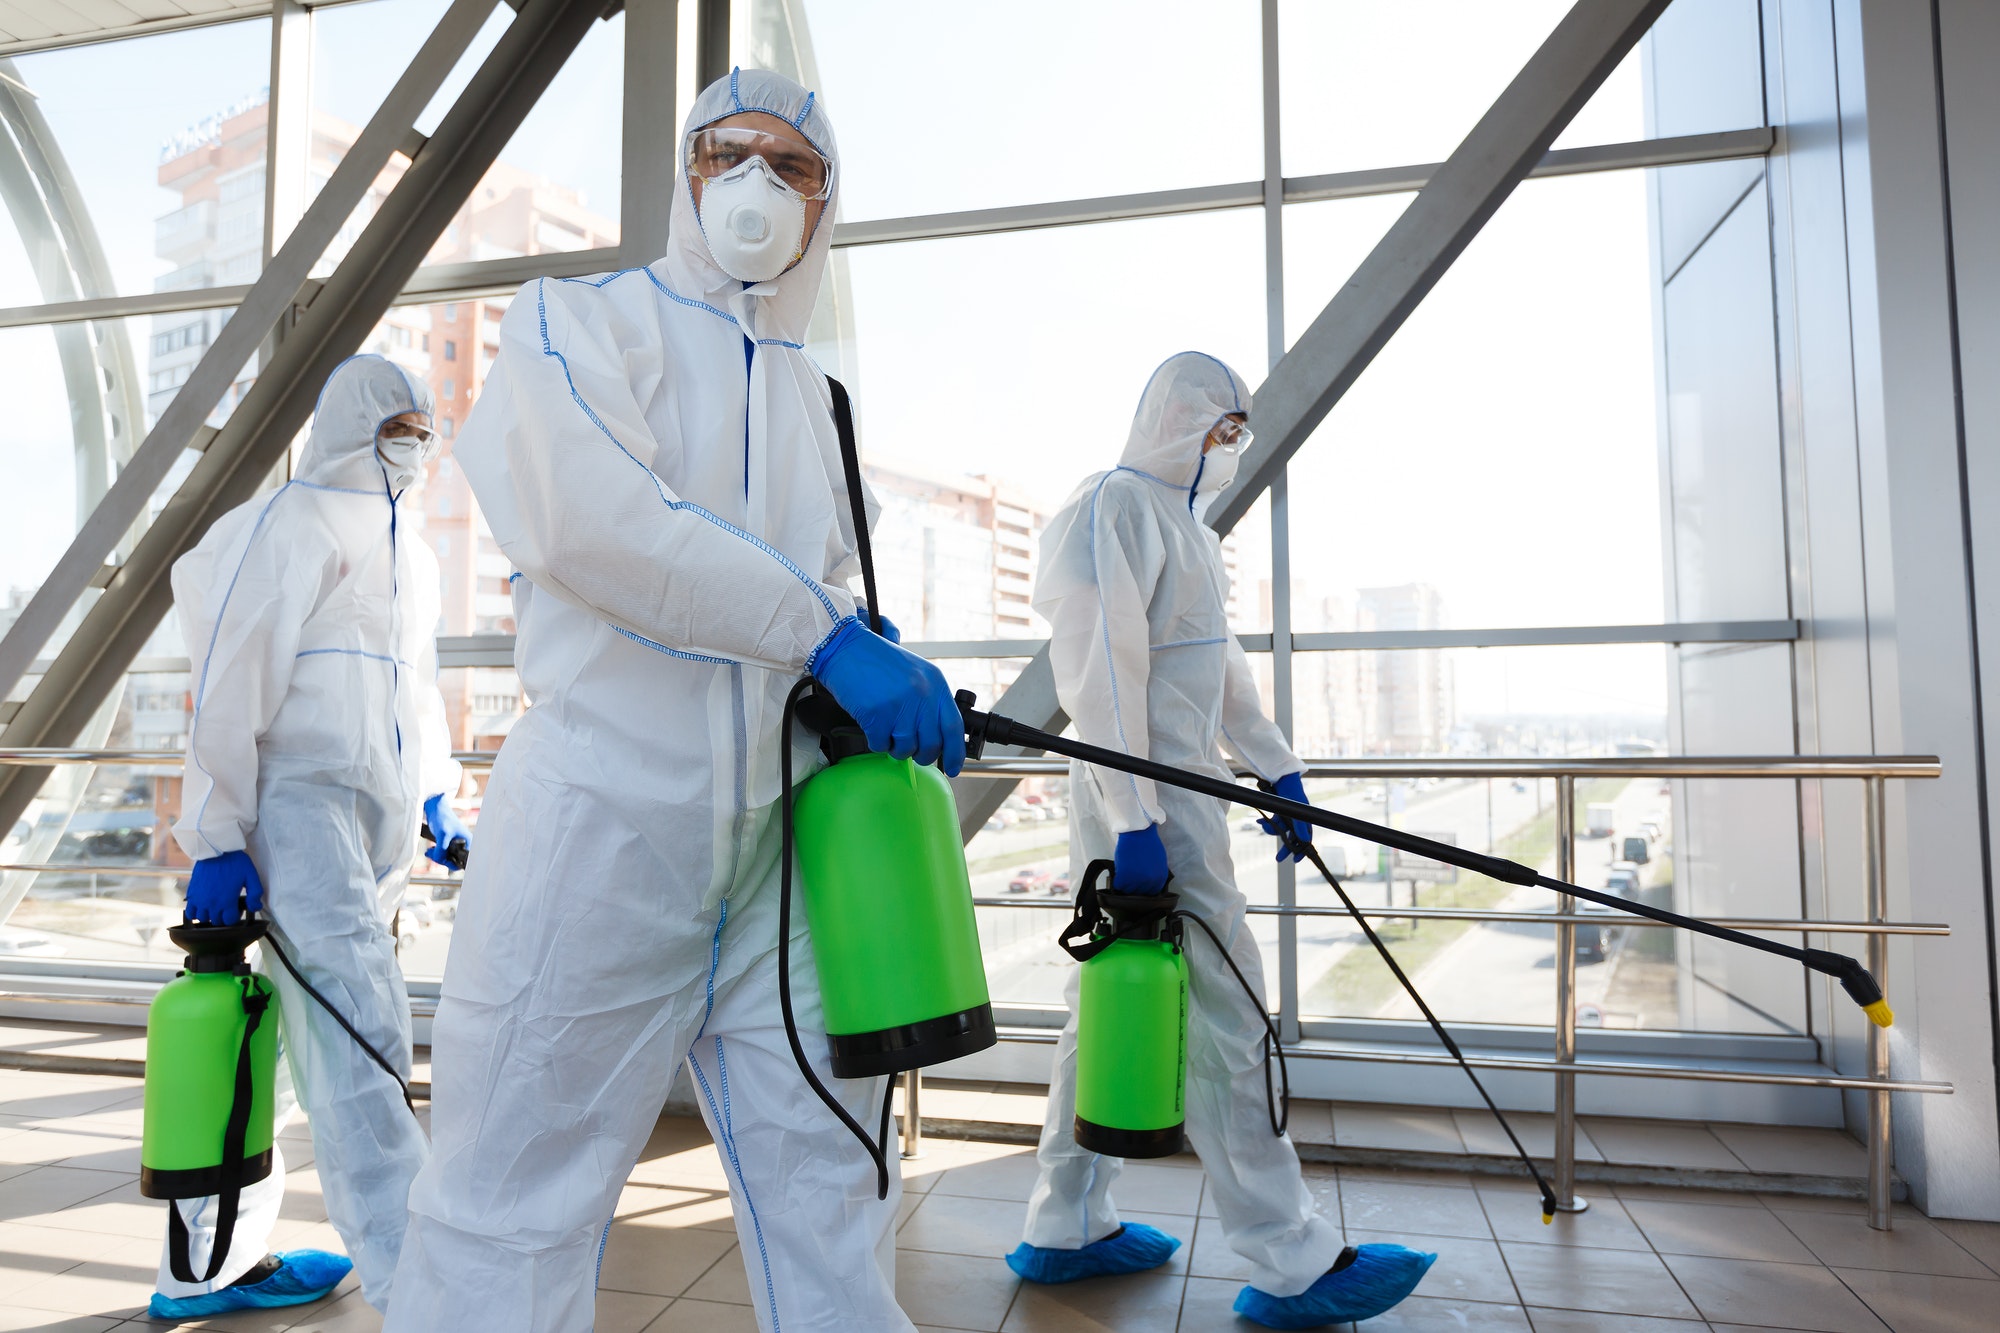 Professional workers in hazmat suits disinfecting indoor accommodation